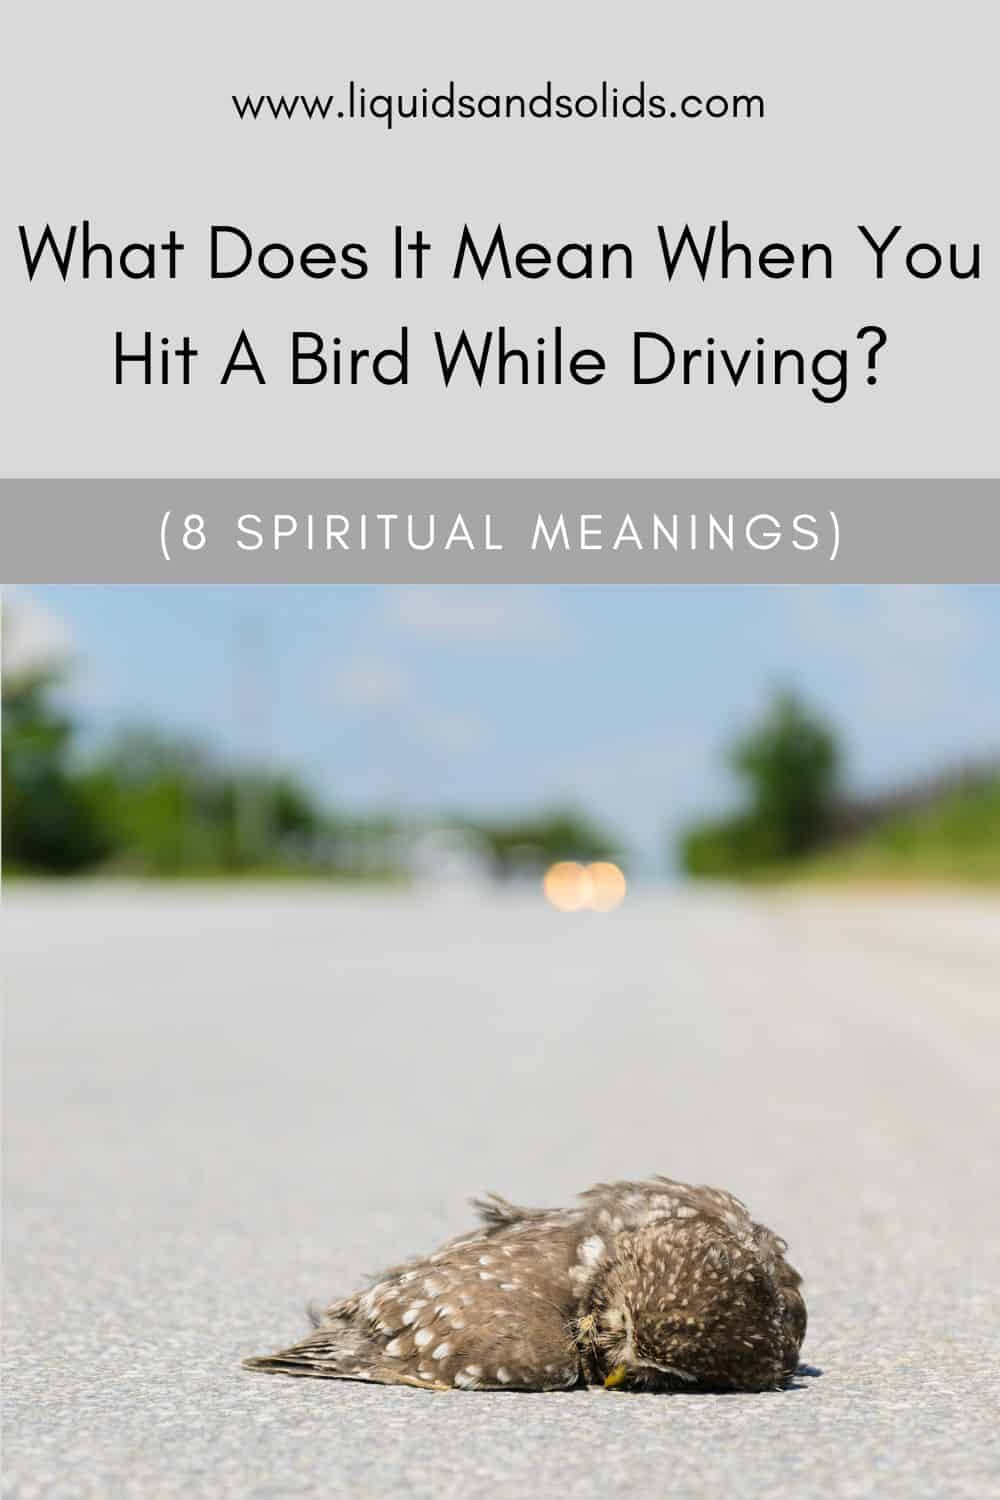 What Does It Mean When You Hit A Bird While Driving? (8 Spiritual Meanings)